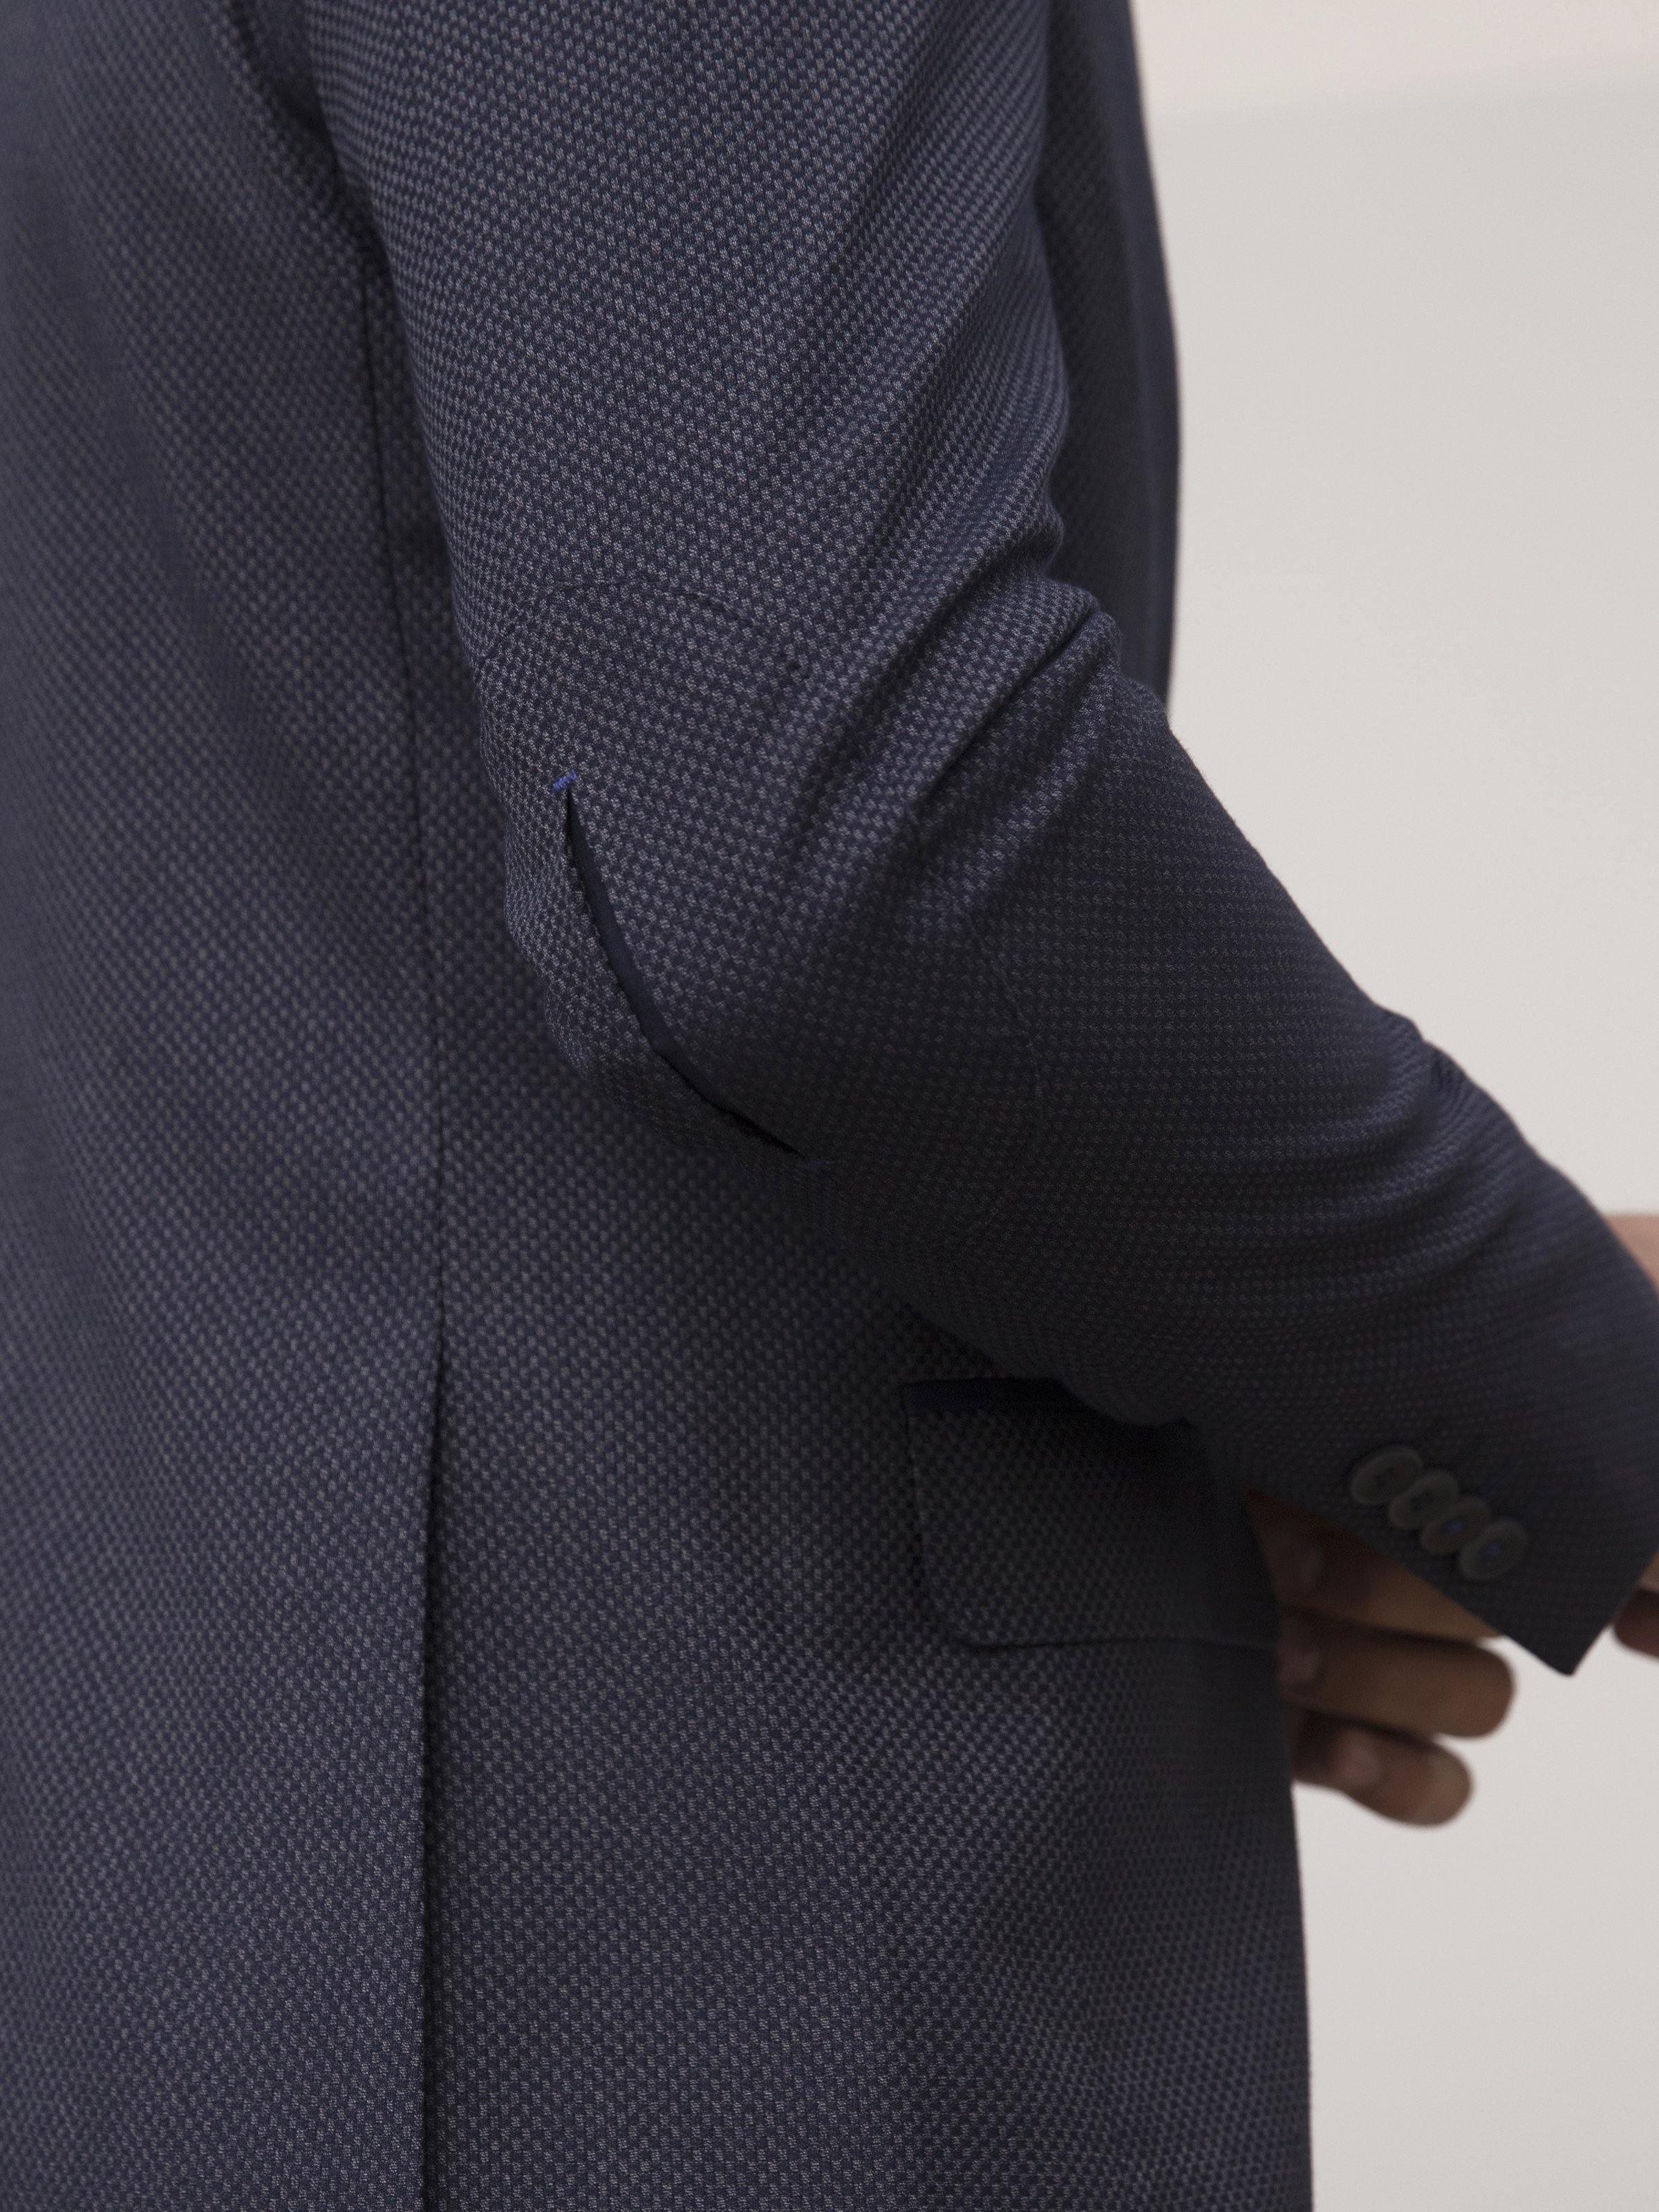 COAT 2 BUTTON SLIM FIT NAVY GREY at Charcoal Clothing